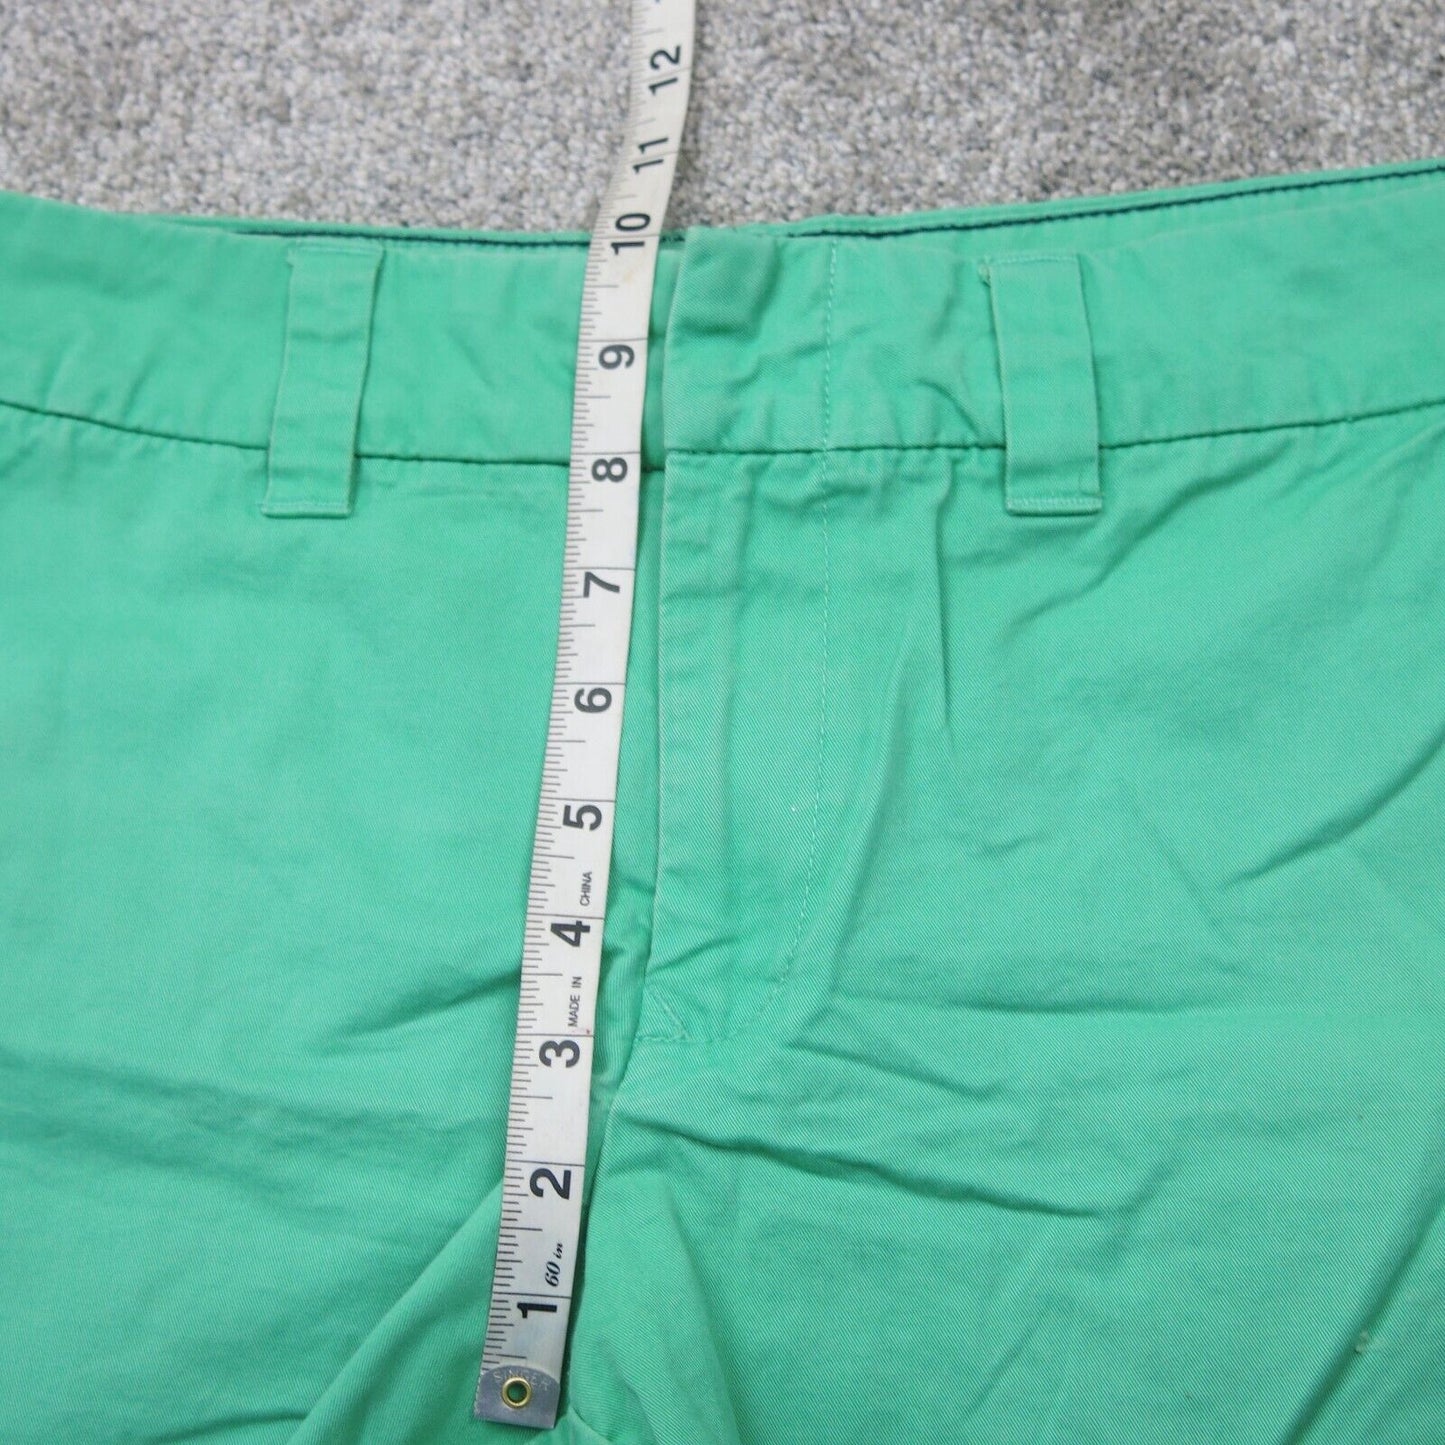 Tommy Hilfiger Women Chino Shorts Mid Rise Flat Front Pockets Mint Green Size 12